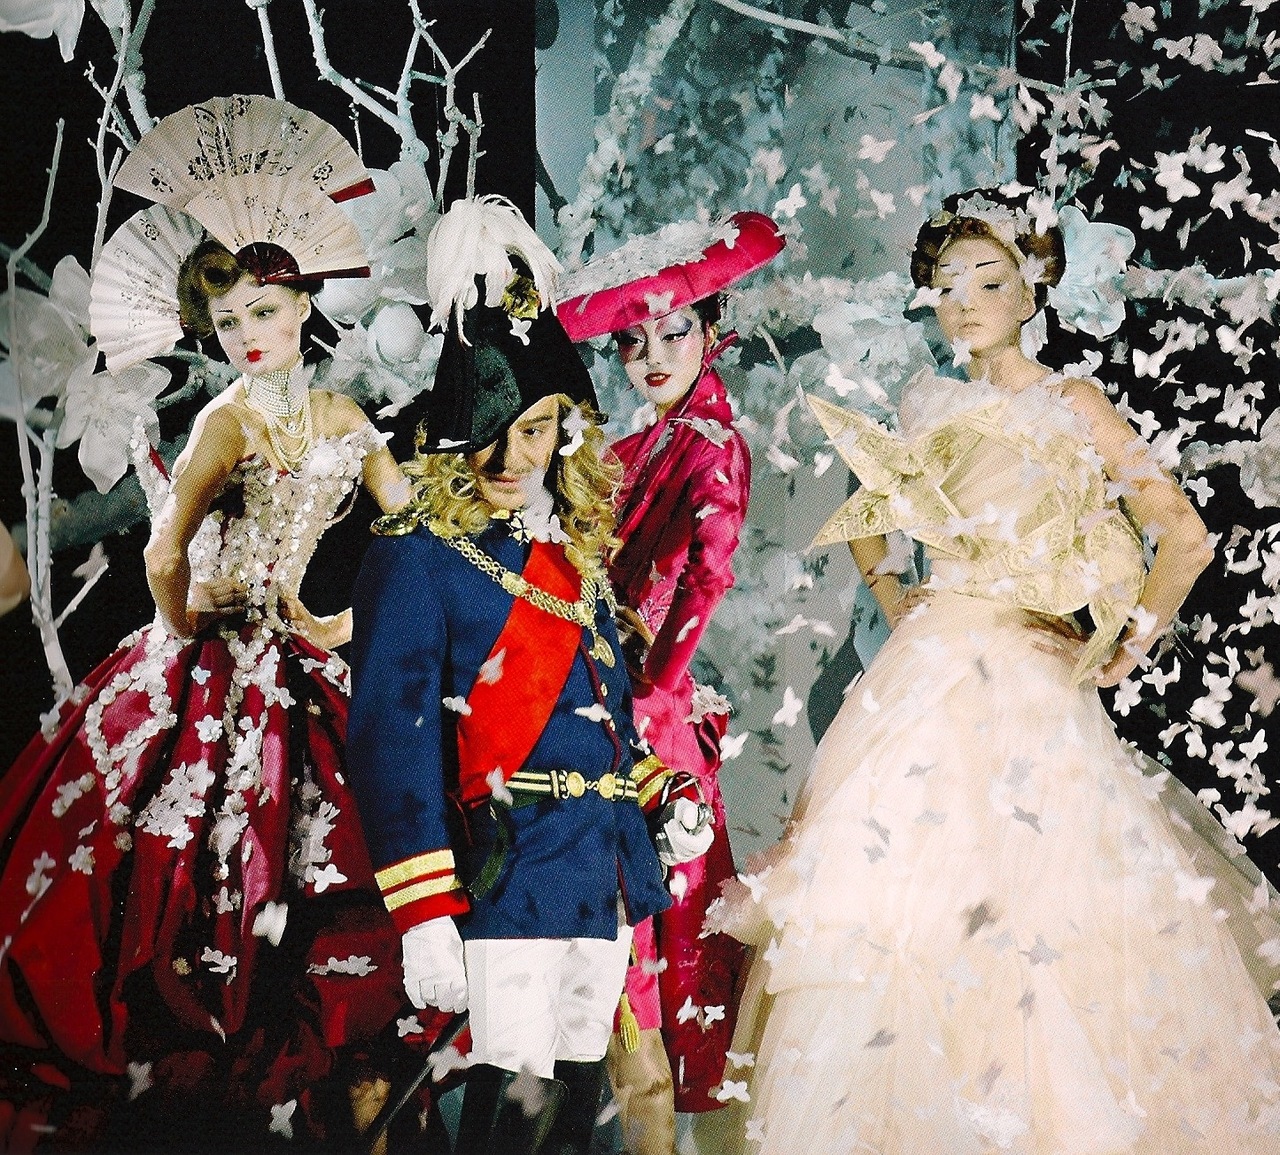 Yes, Mr. Dior. Designer John Galliano for DIor Spring 2007 in over-the-top ensemble display.